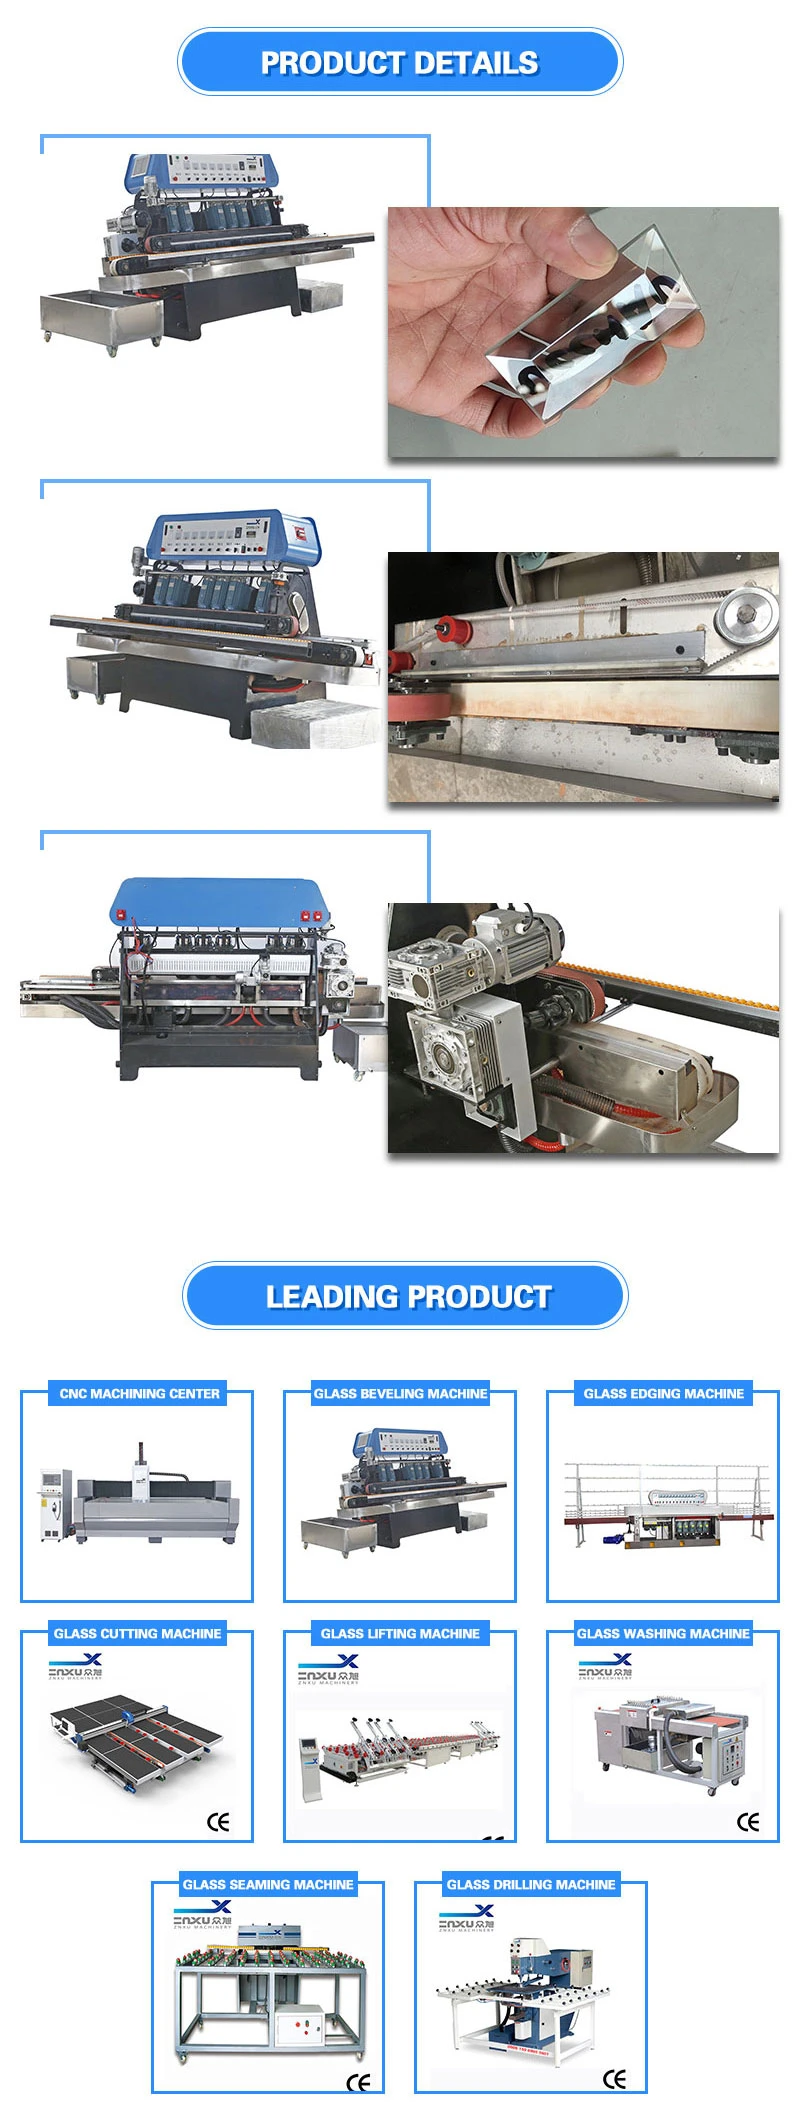 The Latest Automatic Linear Glass Beveling Machine